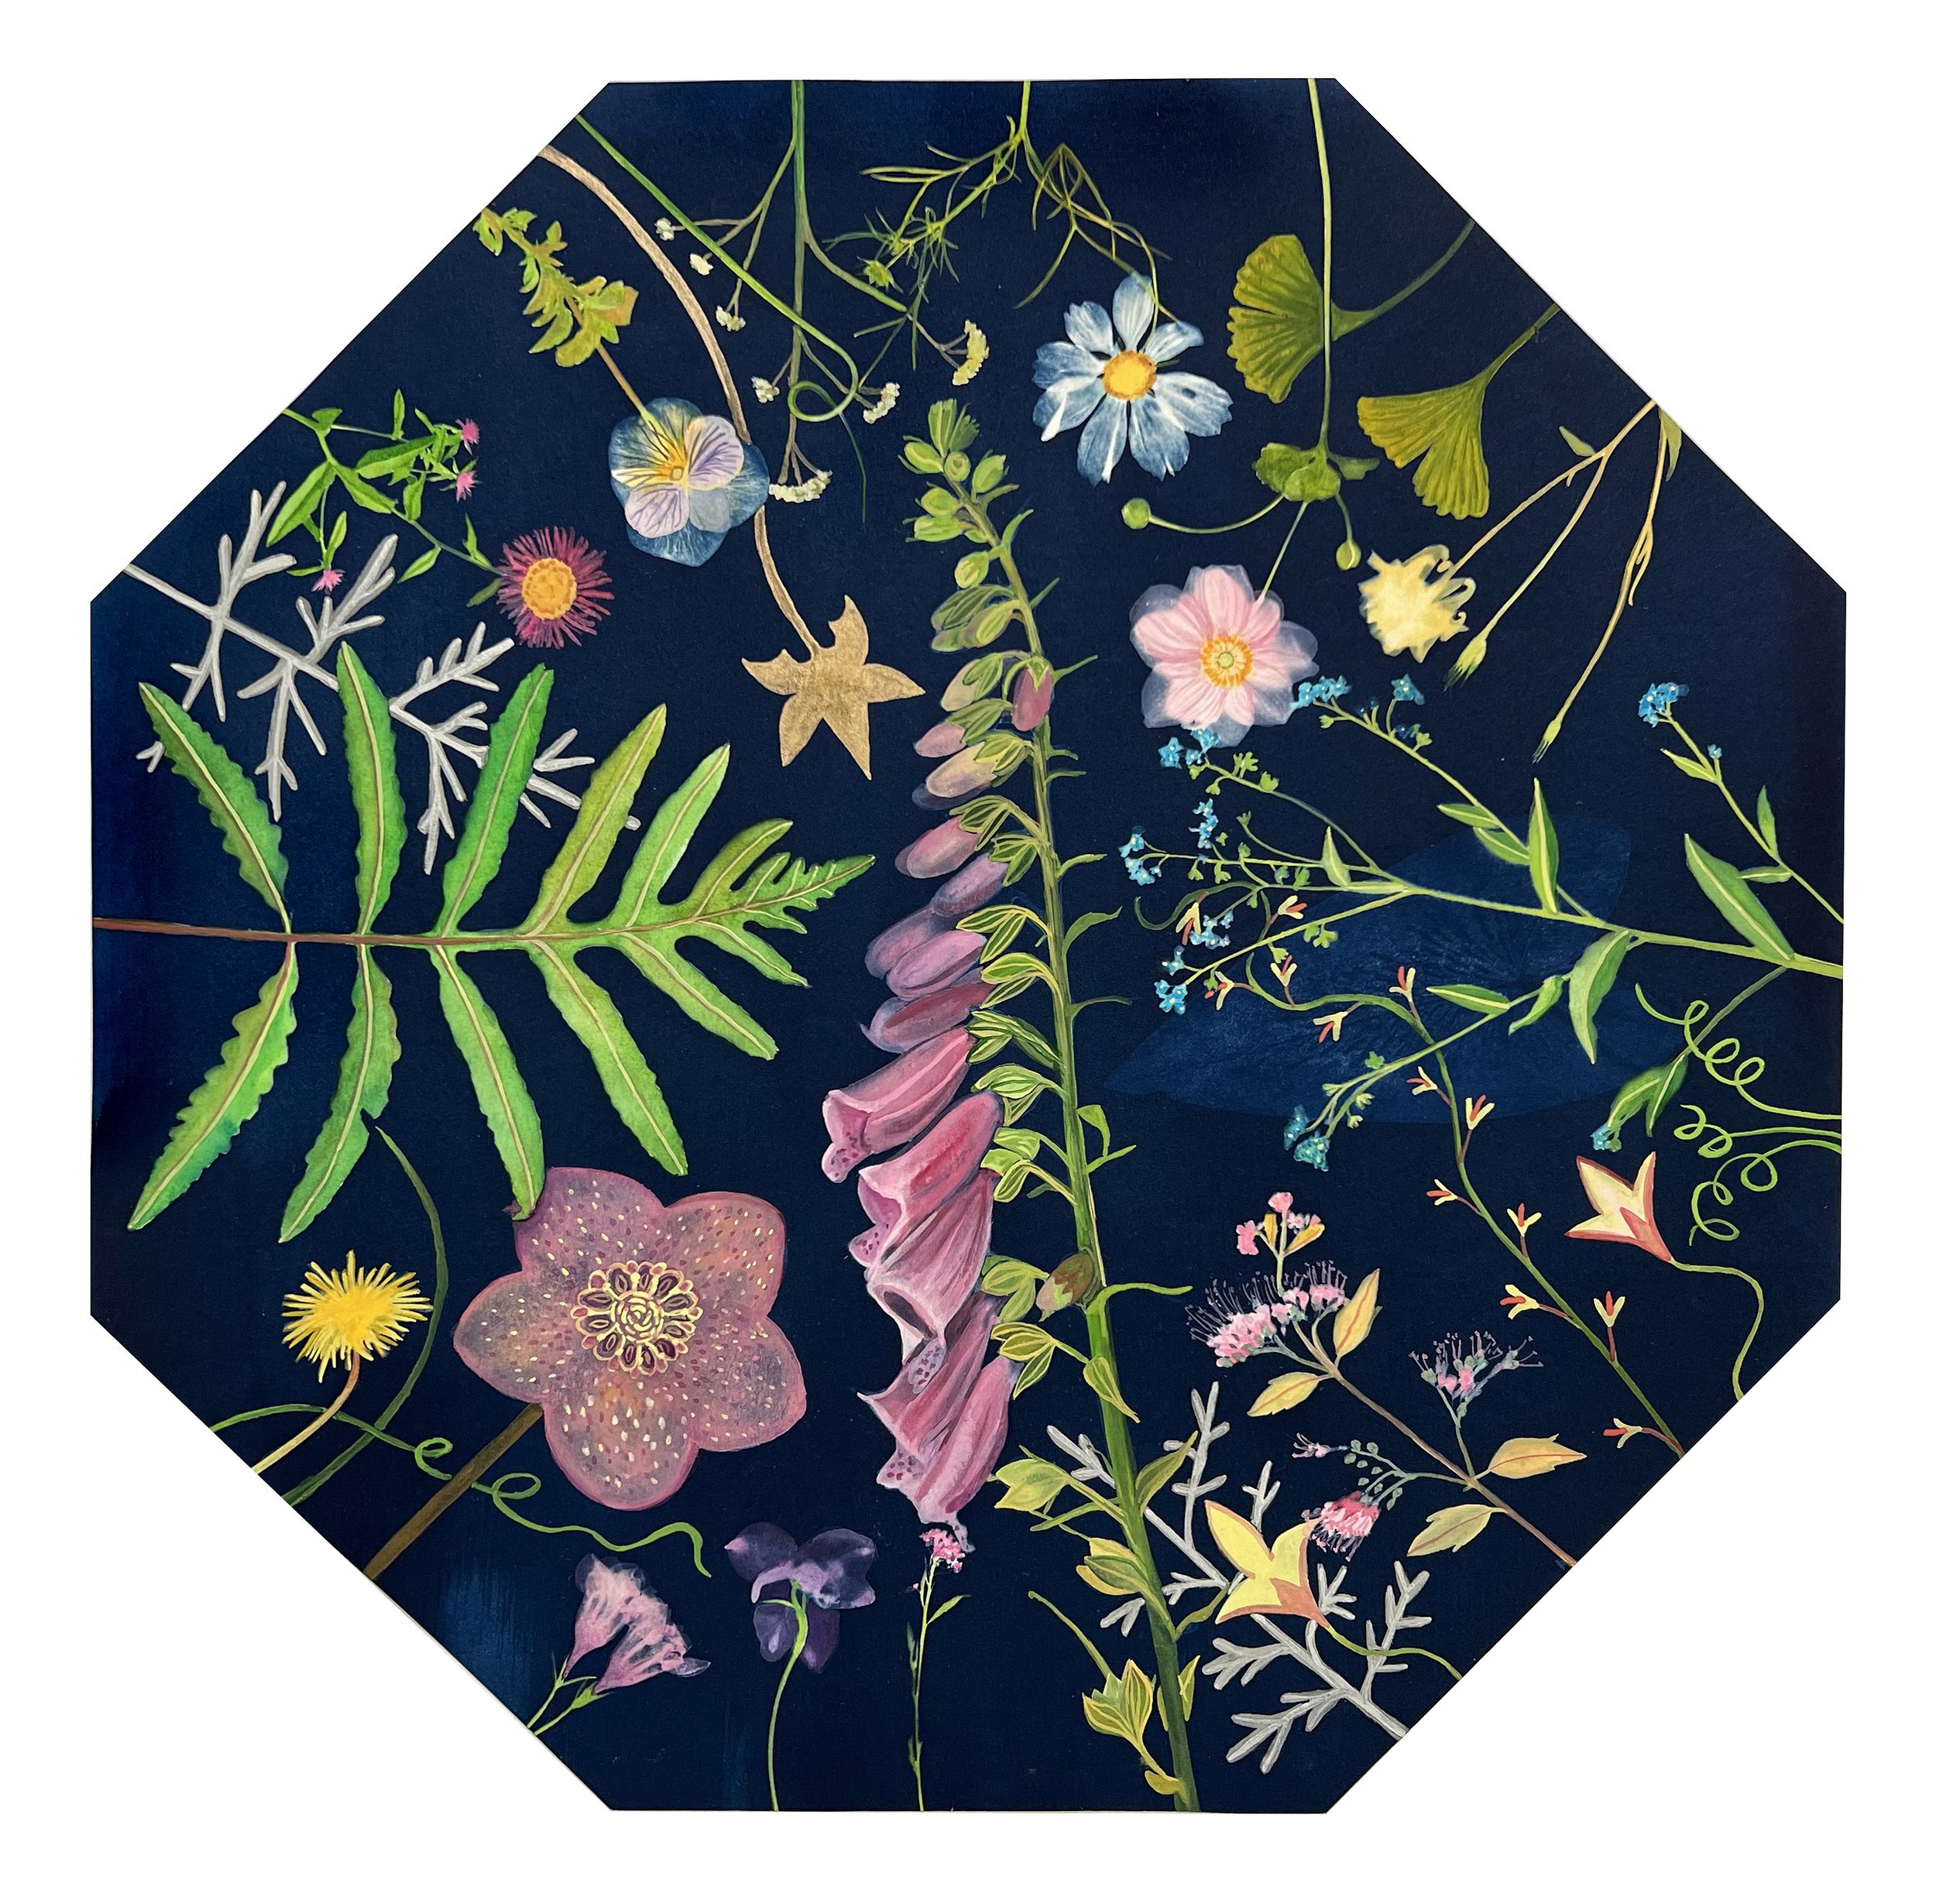 Picturesque Botany (Octagon/Foxglove, Gingko, Dusty Miller, Forget Me Not, Violet, Aster, etc)